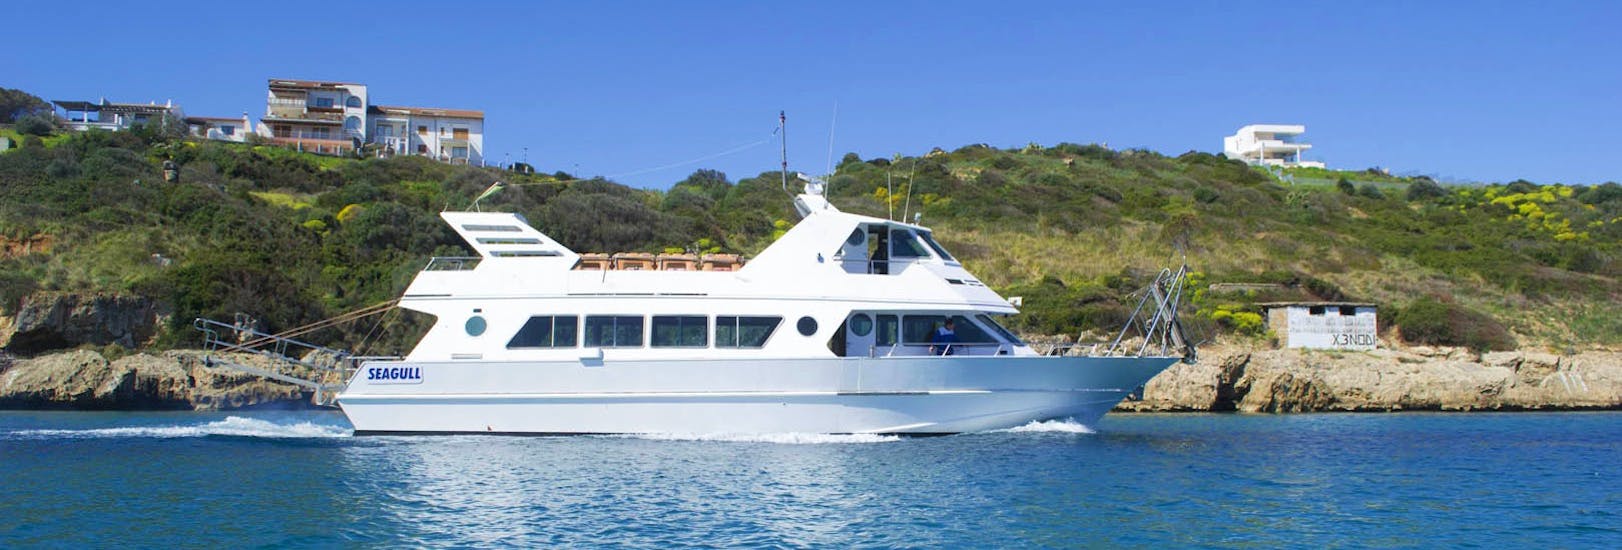 Our beautiful motorboat Seagull during a boat trip to the La Maddalena archipelago with Mistral & Estasi's Escursioni. 